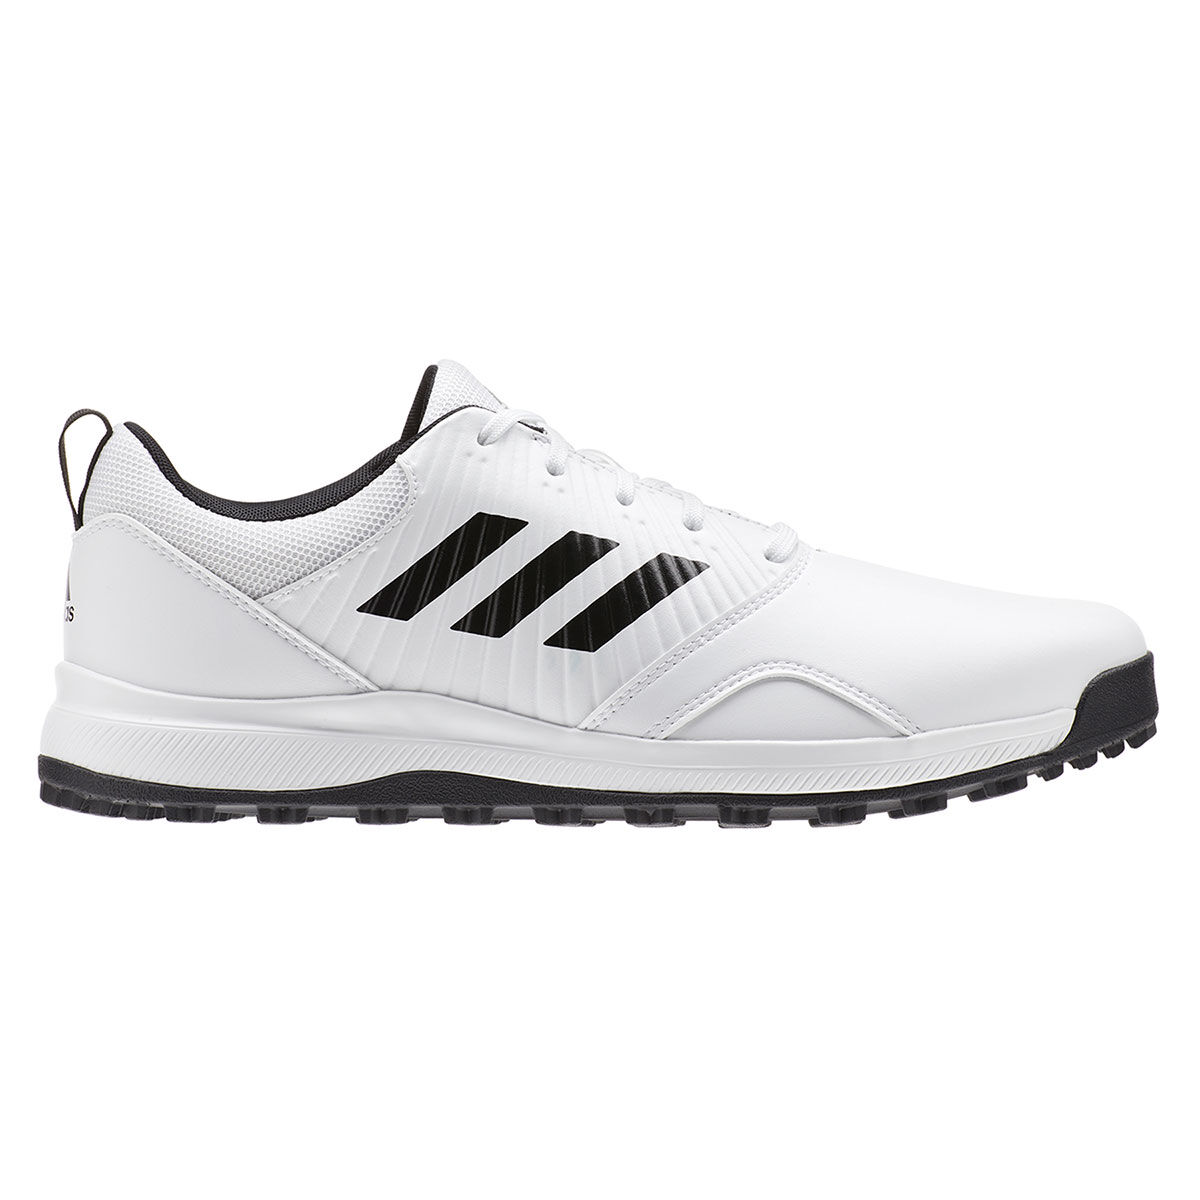 adidas Men’s CP Traxion Spikeless Golf Shoes, Mens, White/core black/grey six, 8, Wide | American Golf